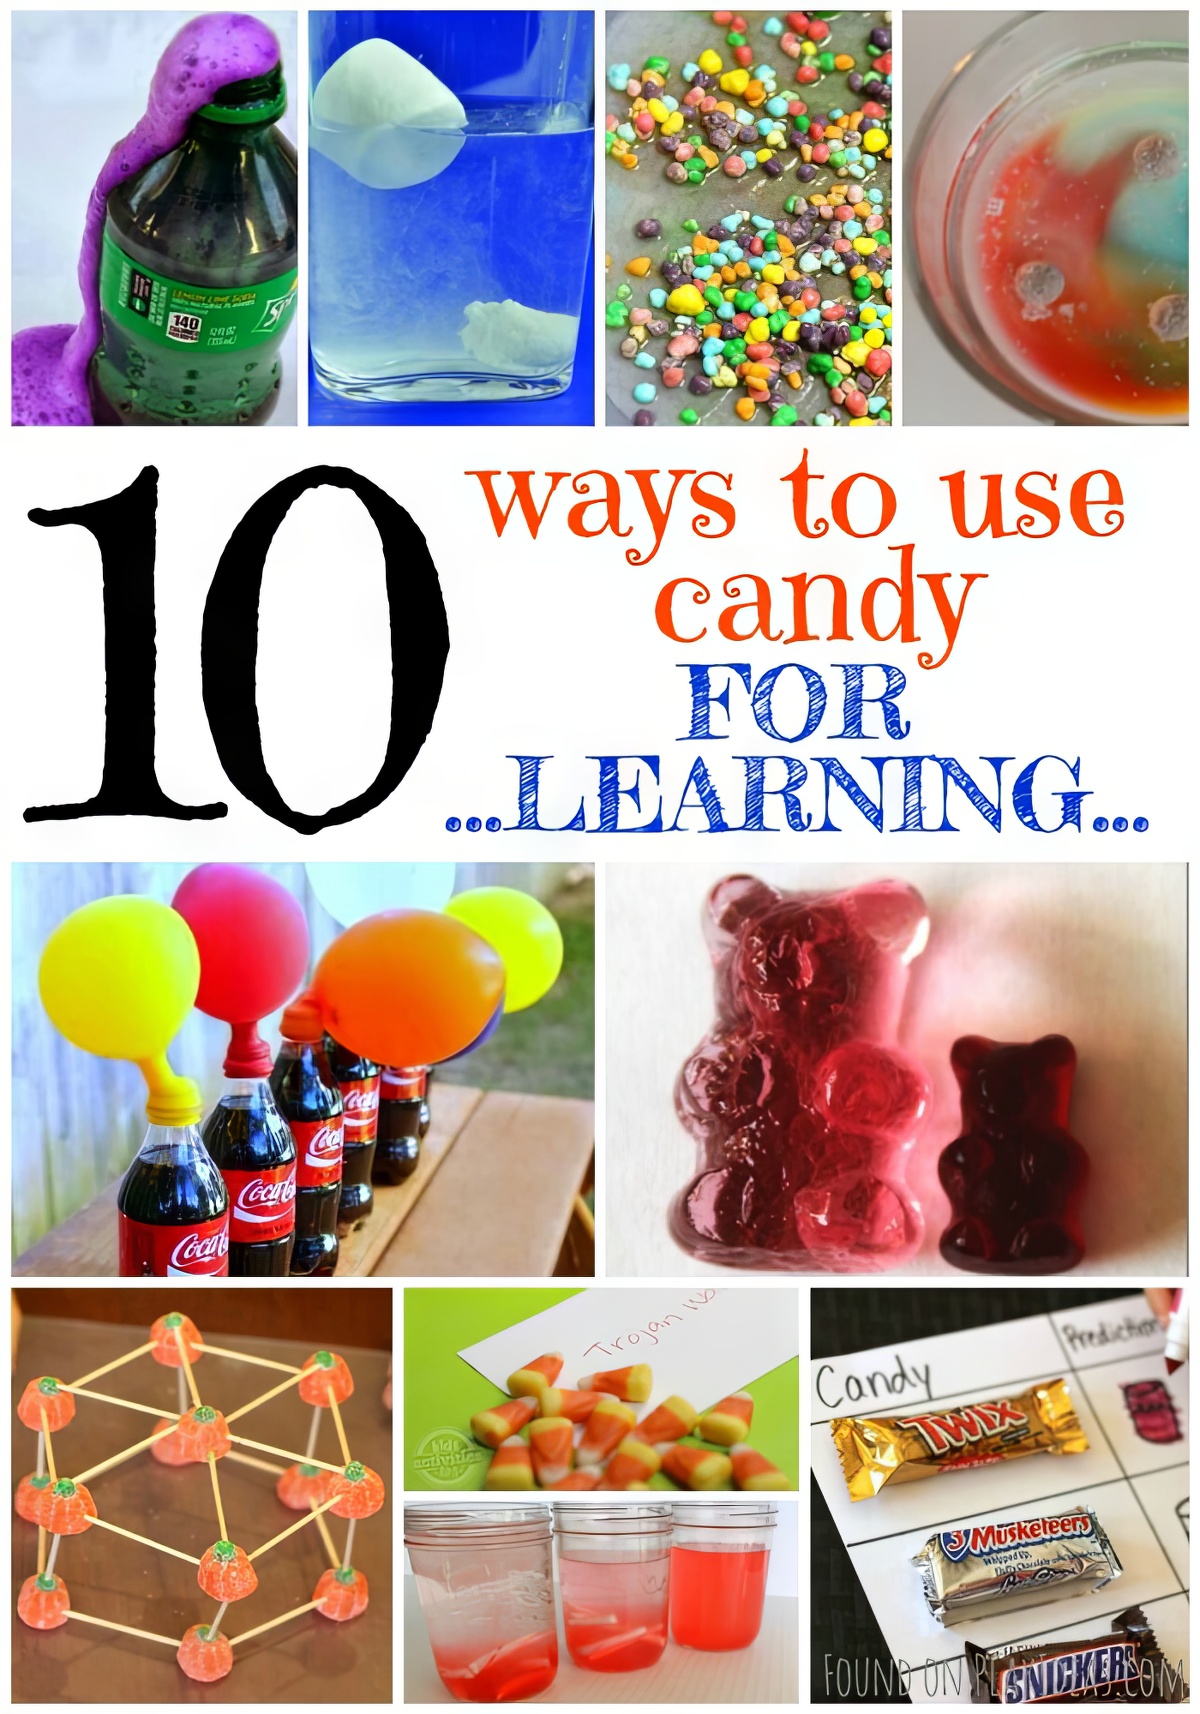 Enjoy fun more ways to use candy for learning!